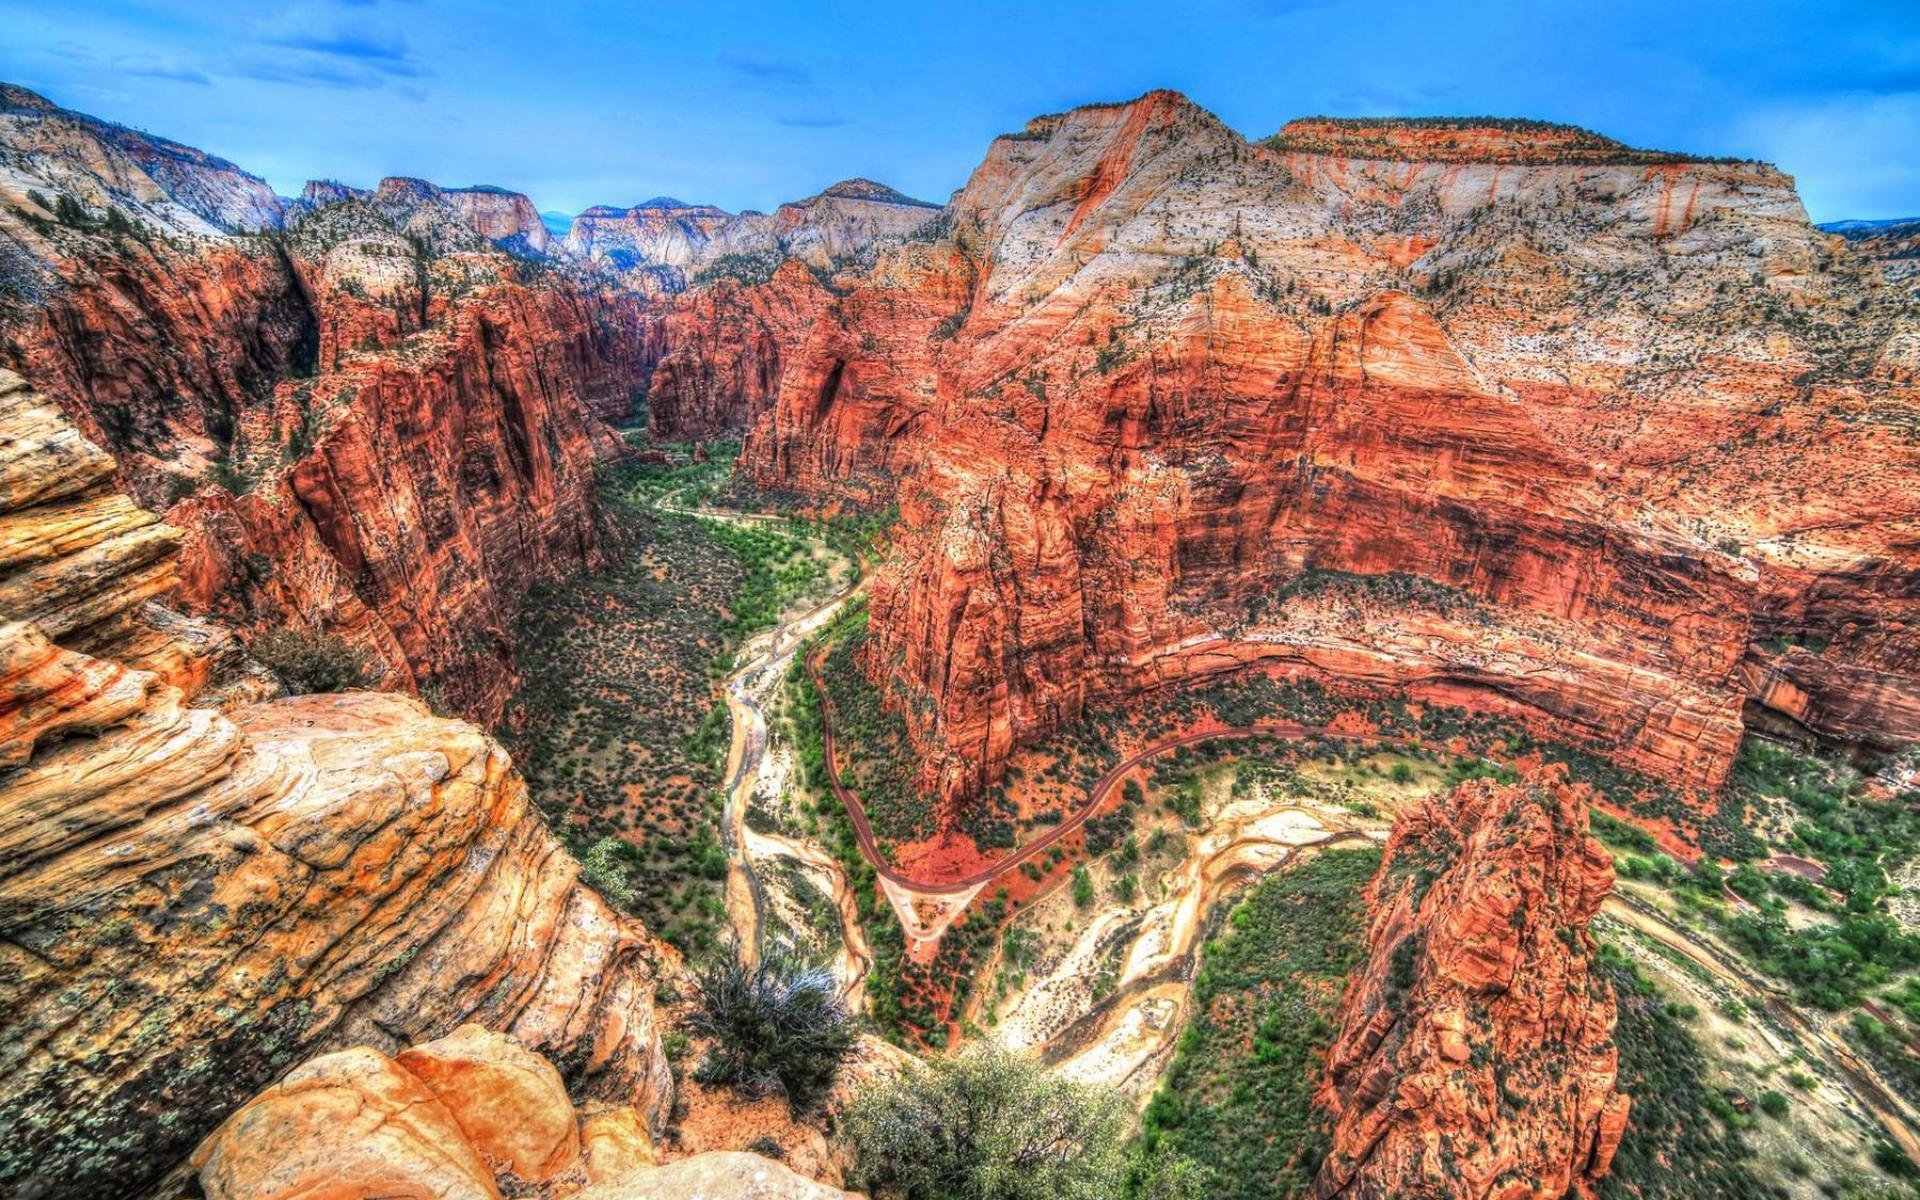 Free download Zion National Park Wallpaper and Background Image stmednet [1920x1200] for your Desktop, Mobile & Tablet. Explore Zion National Park Wallpaper. Zion National Park Wallpaper, Zion National Park